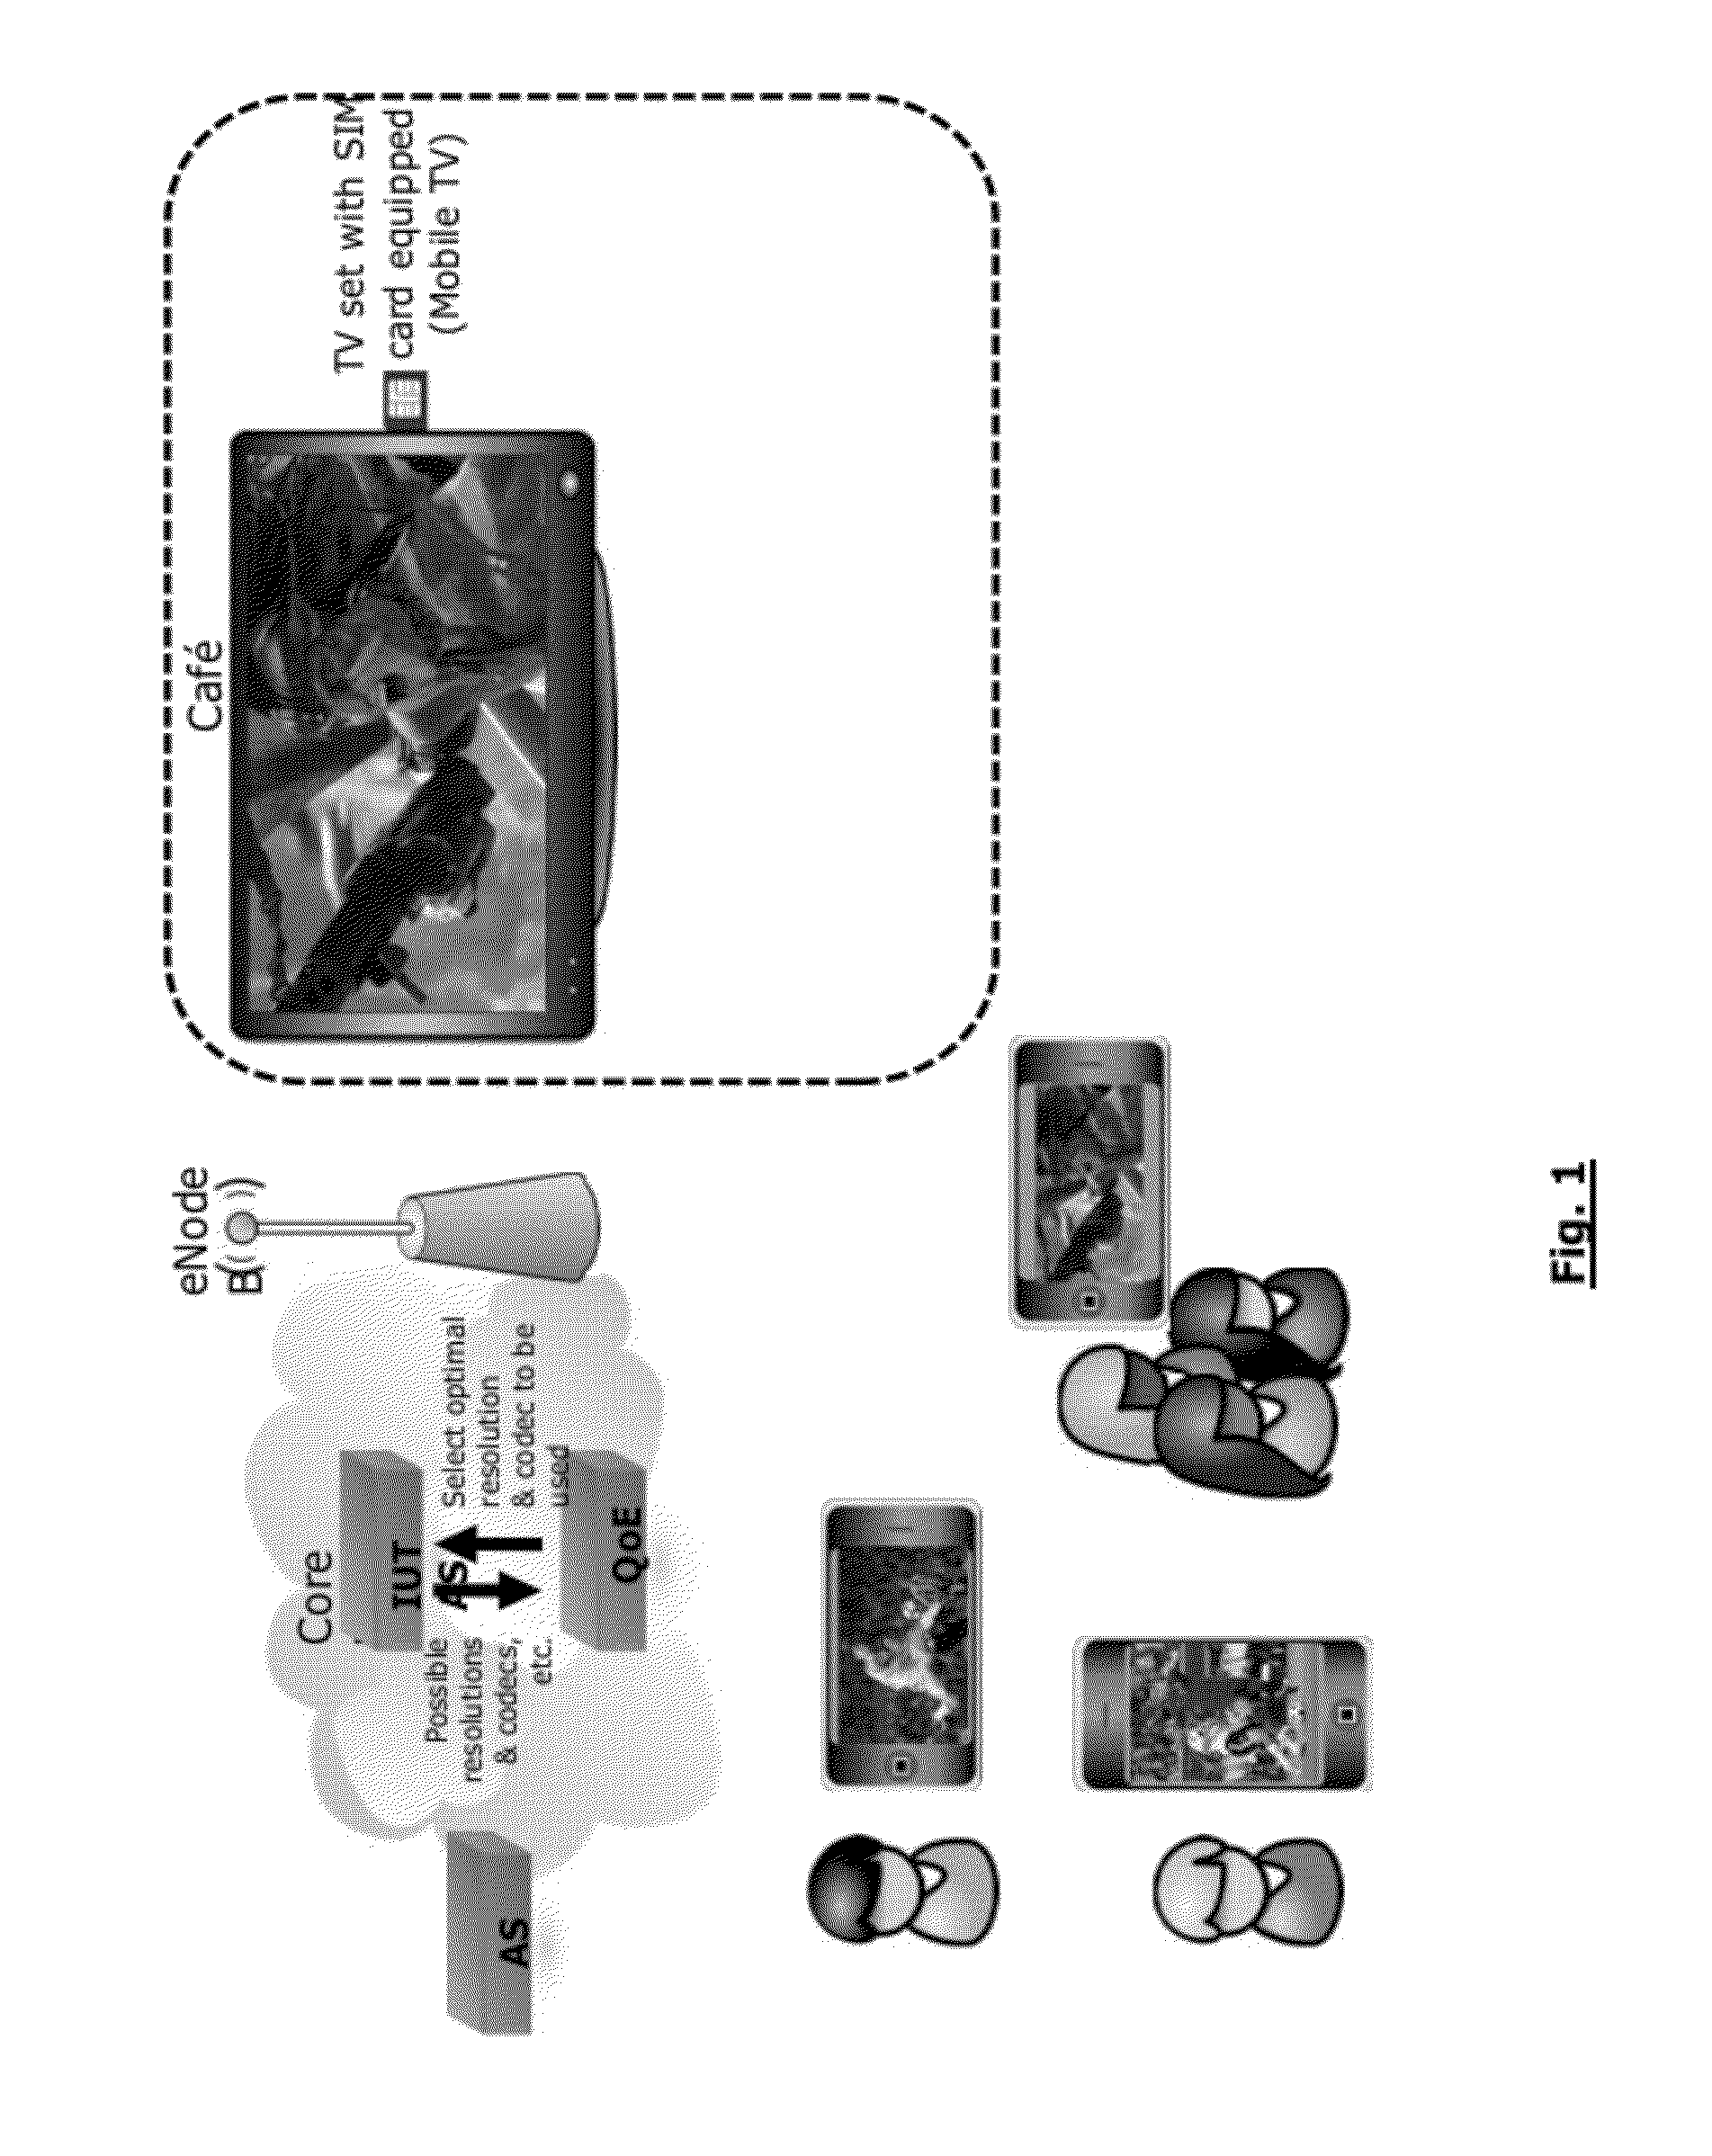 Method and an apparatus for transferring a video stream